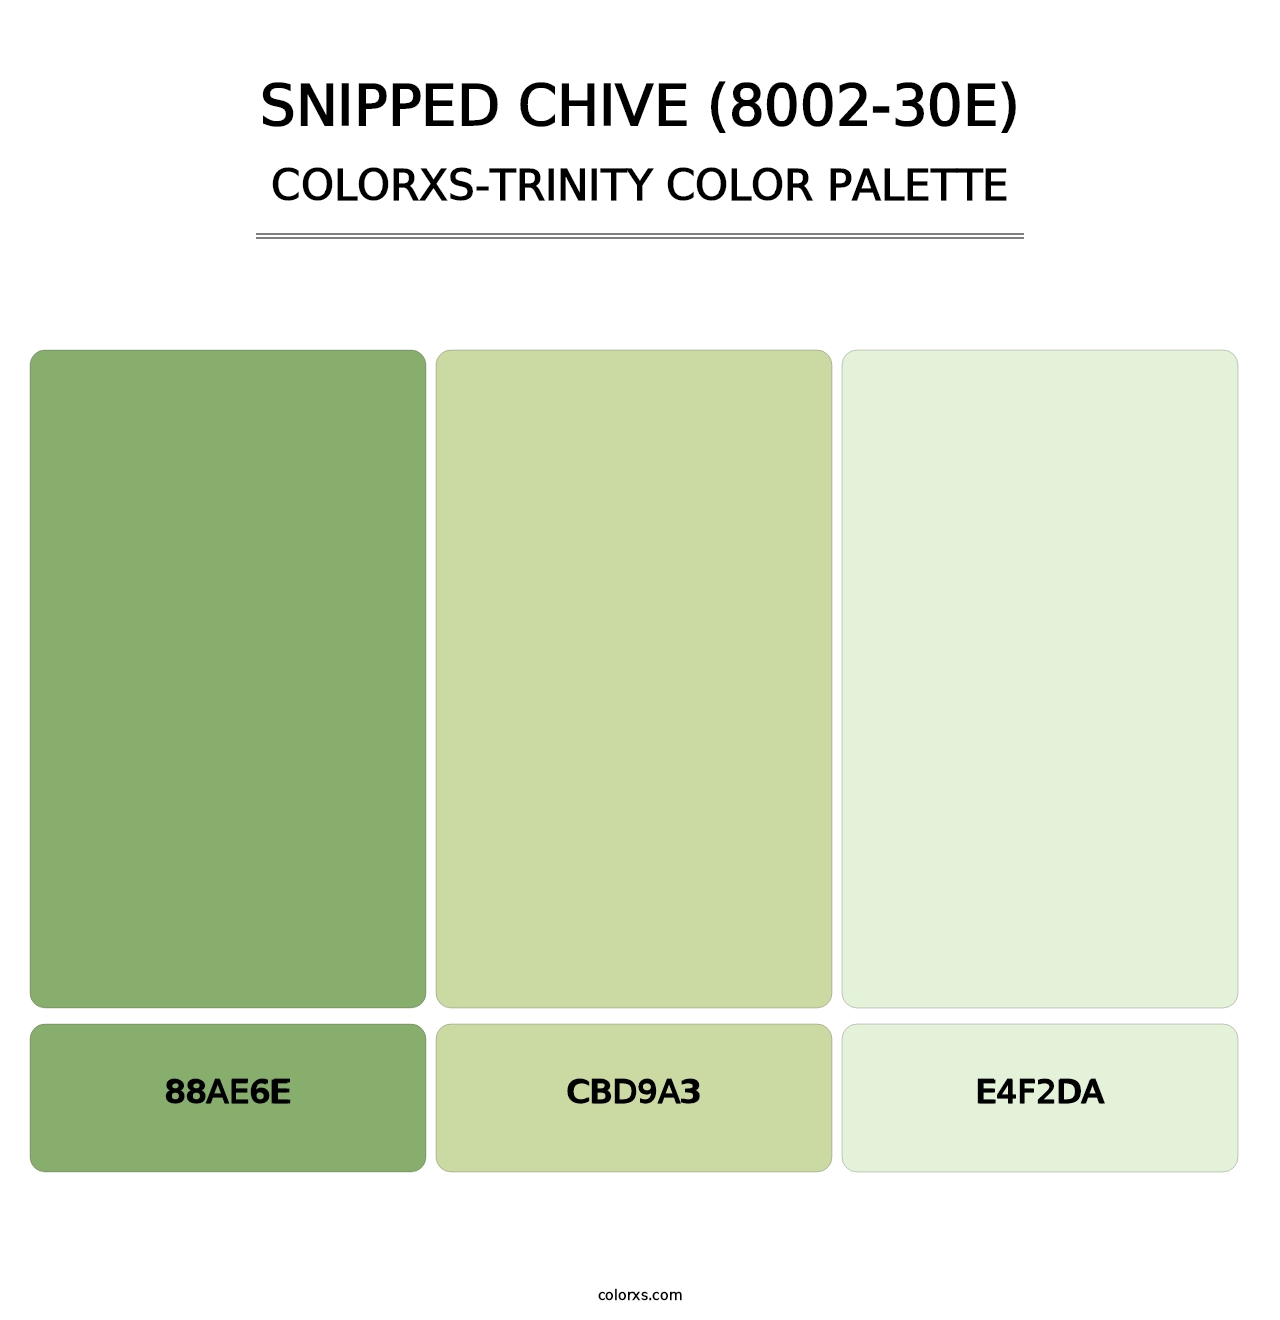 Snipped Chive (8002-30E) - Colorxs Trinity Palette